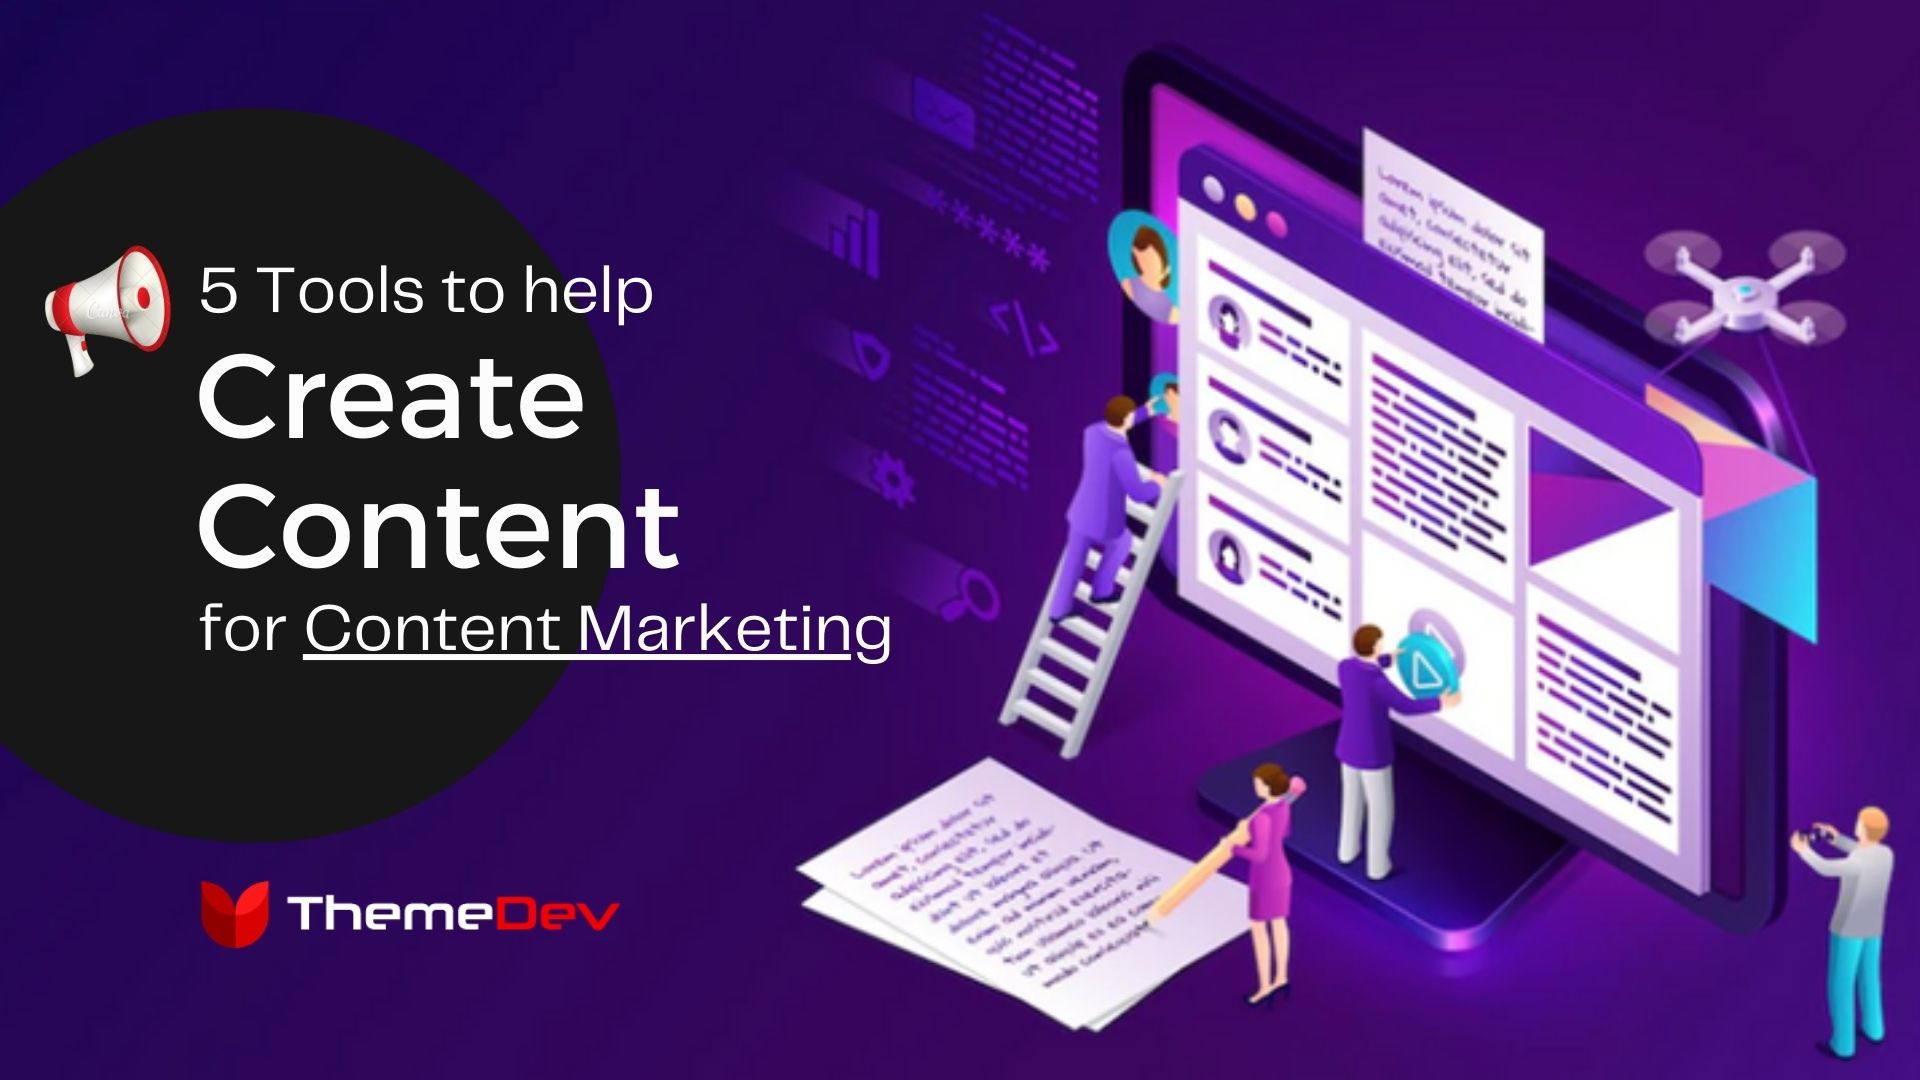 5 Tools to Help You Create Content for Content Marketing